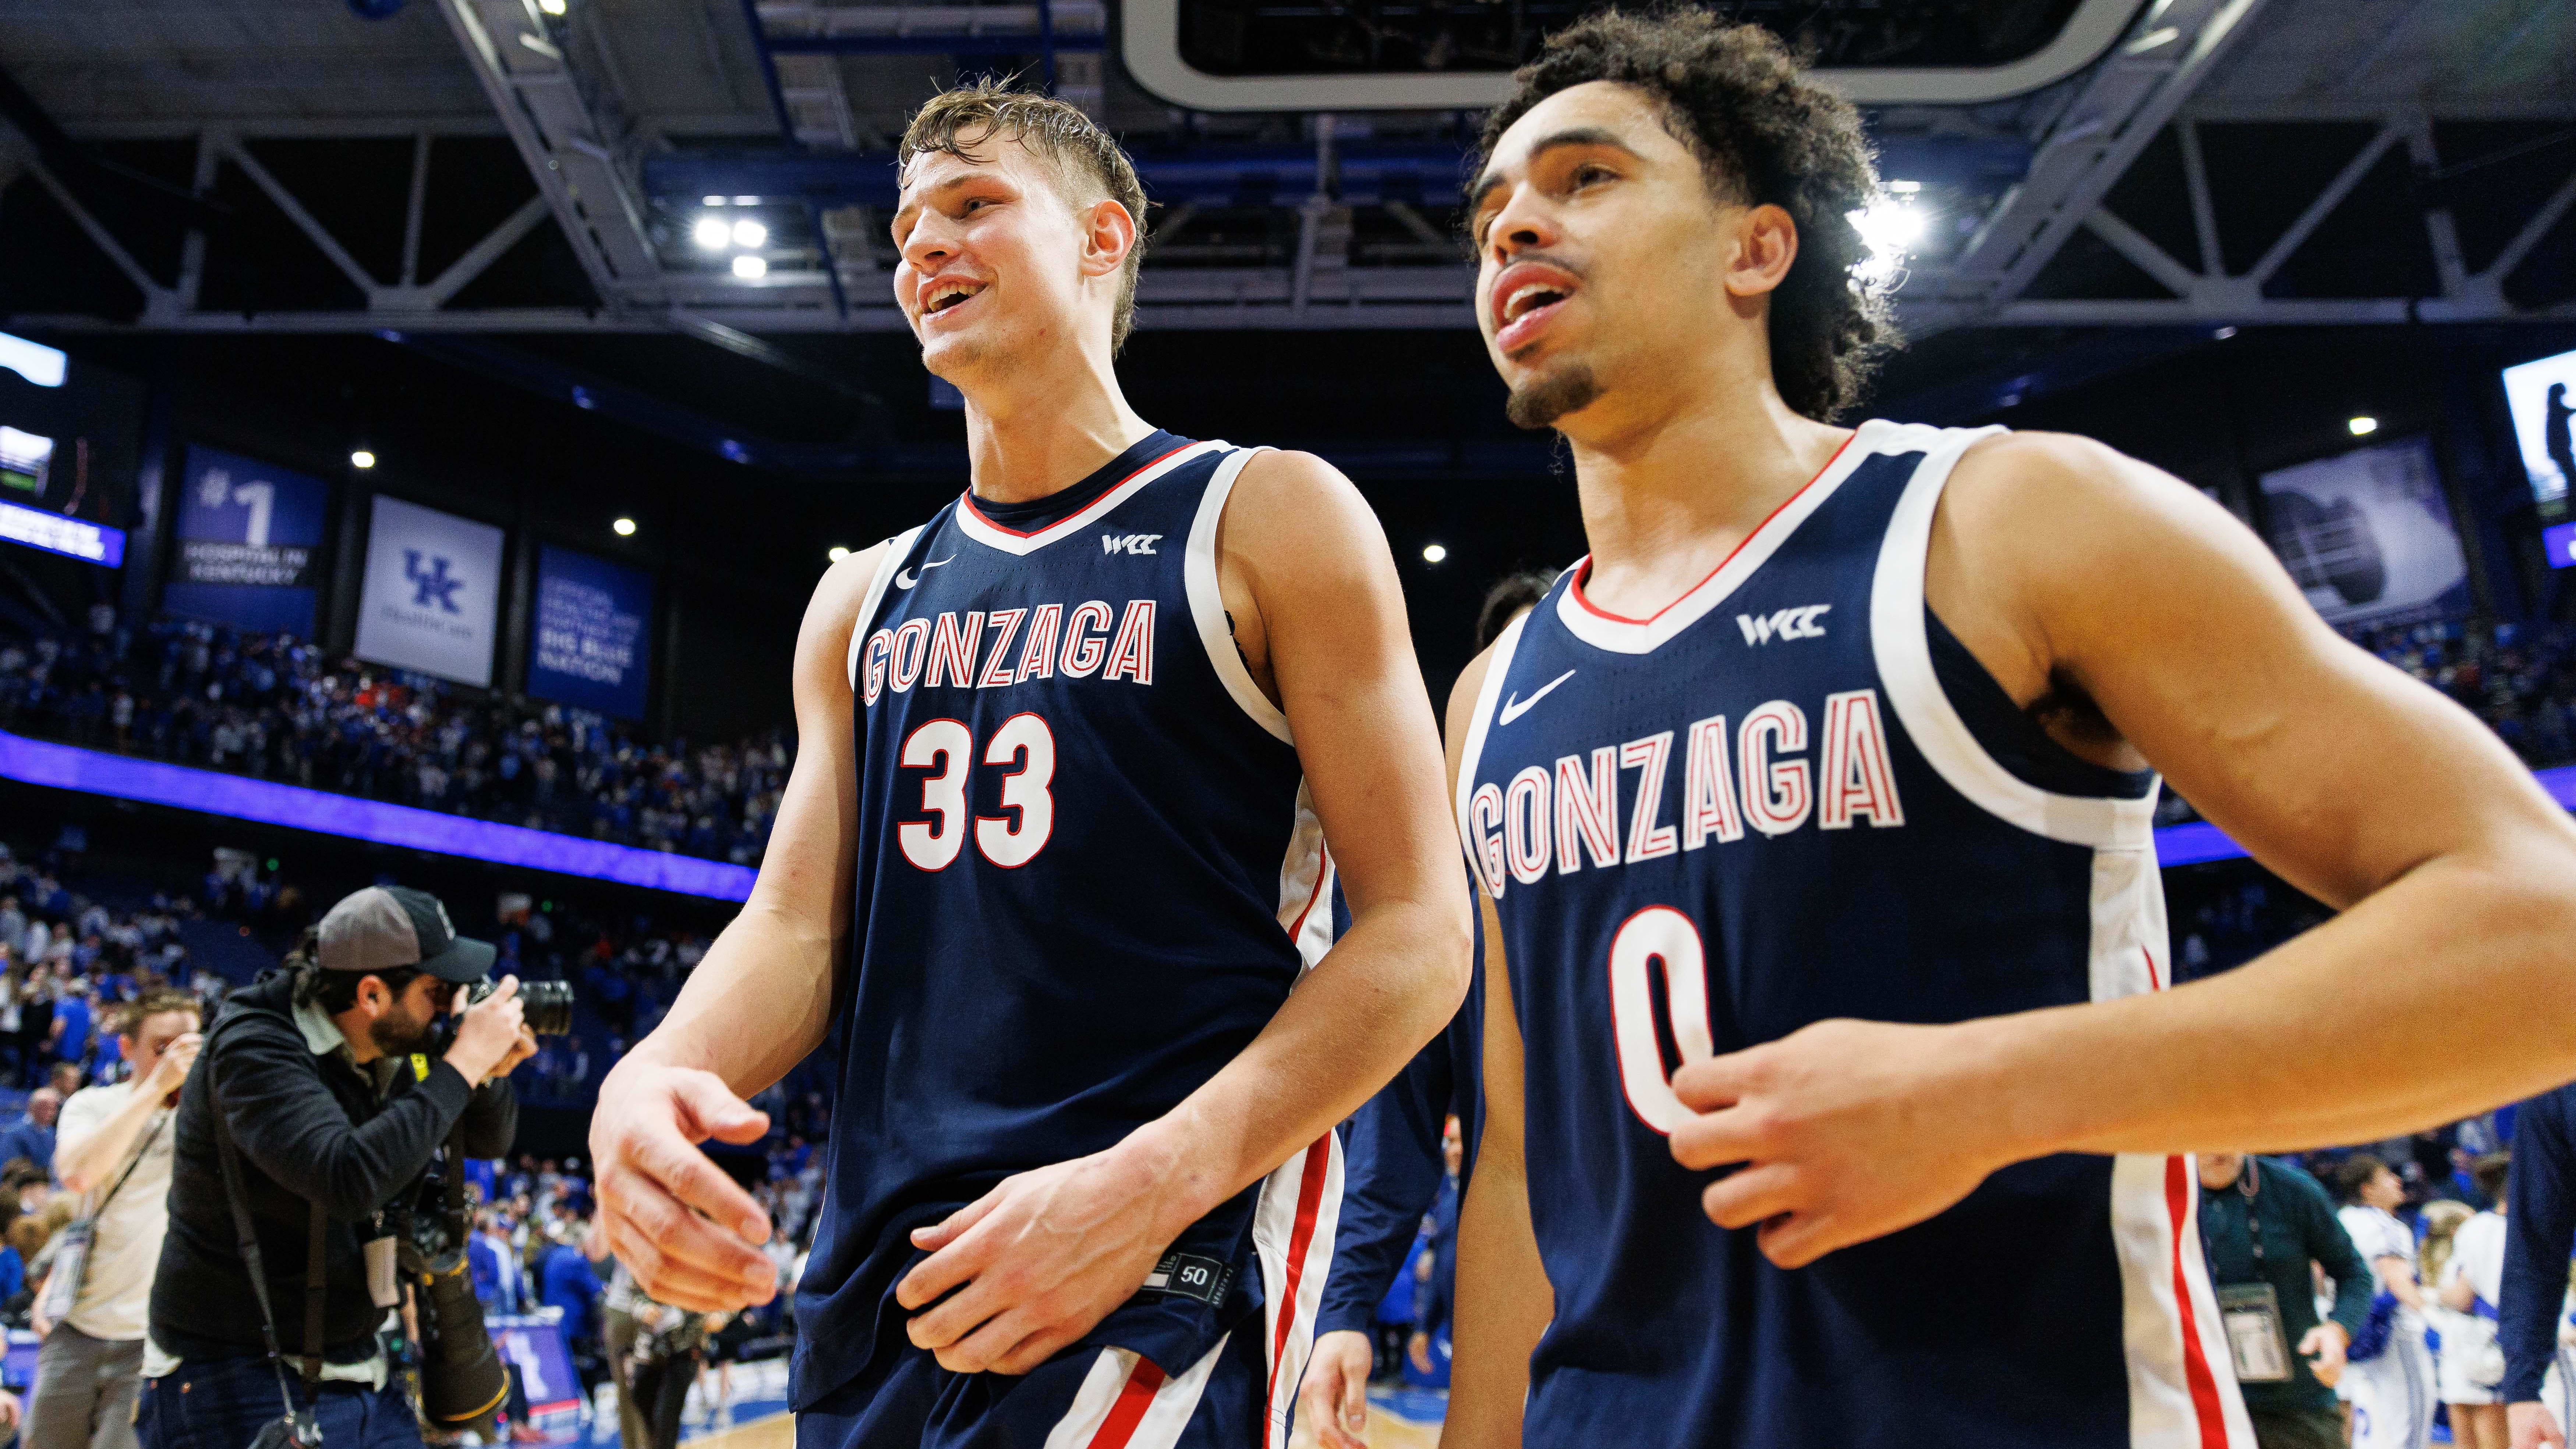 CBS Sports places Gonzaga at No. 7 in their Preseason Top 25 and 1 for 2024-25.